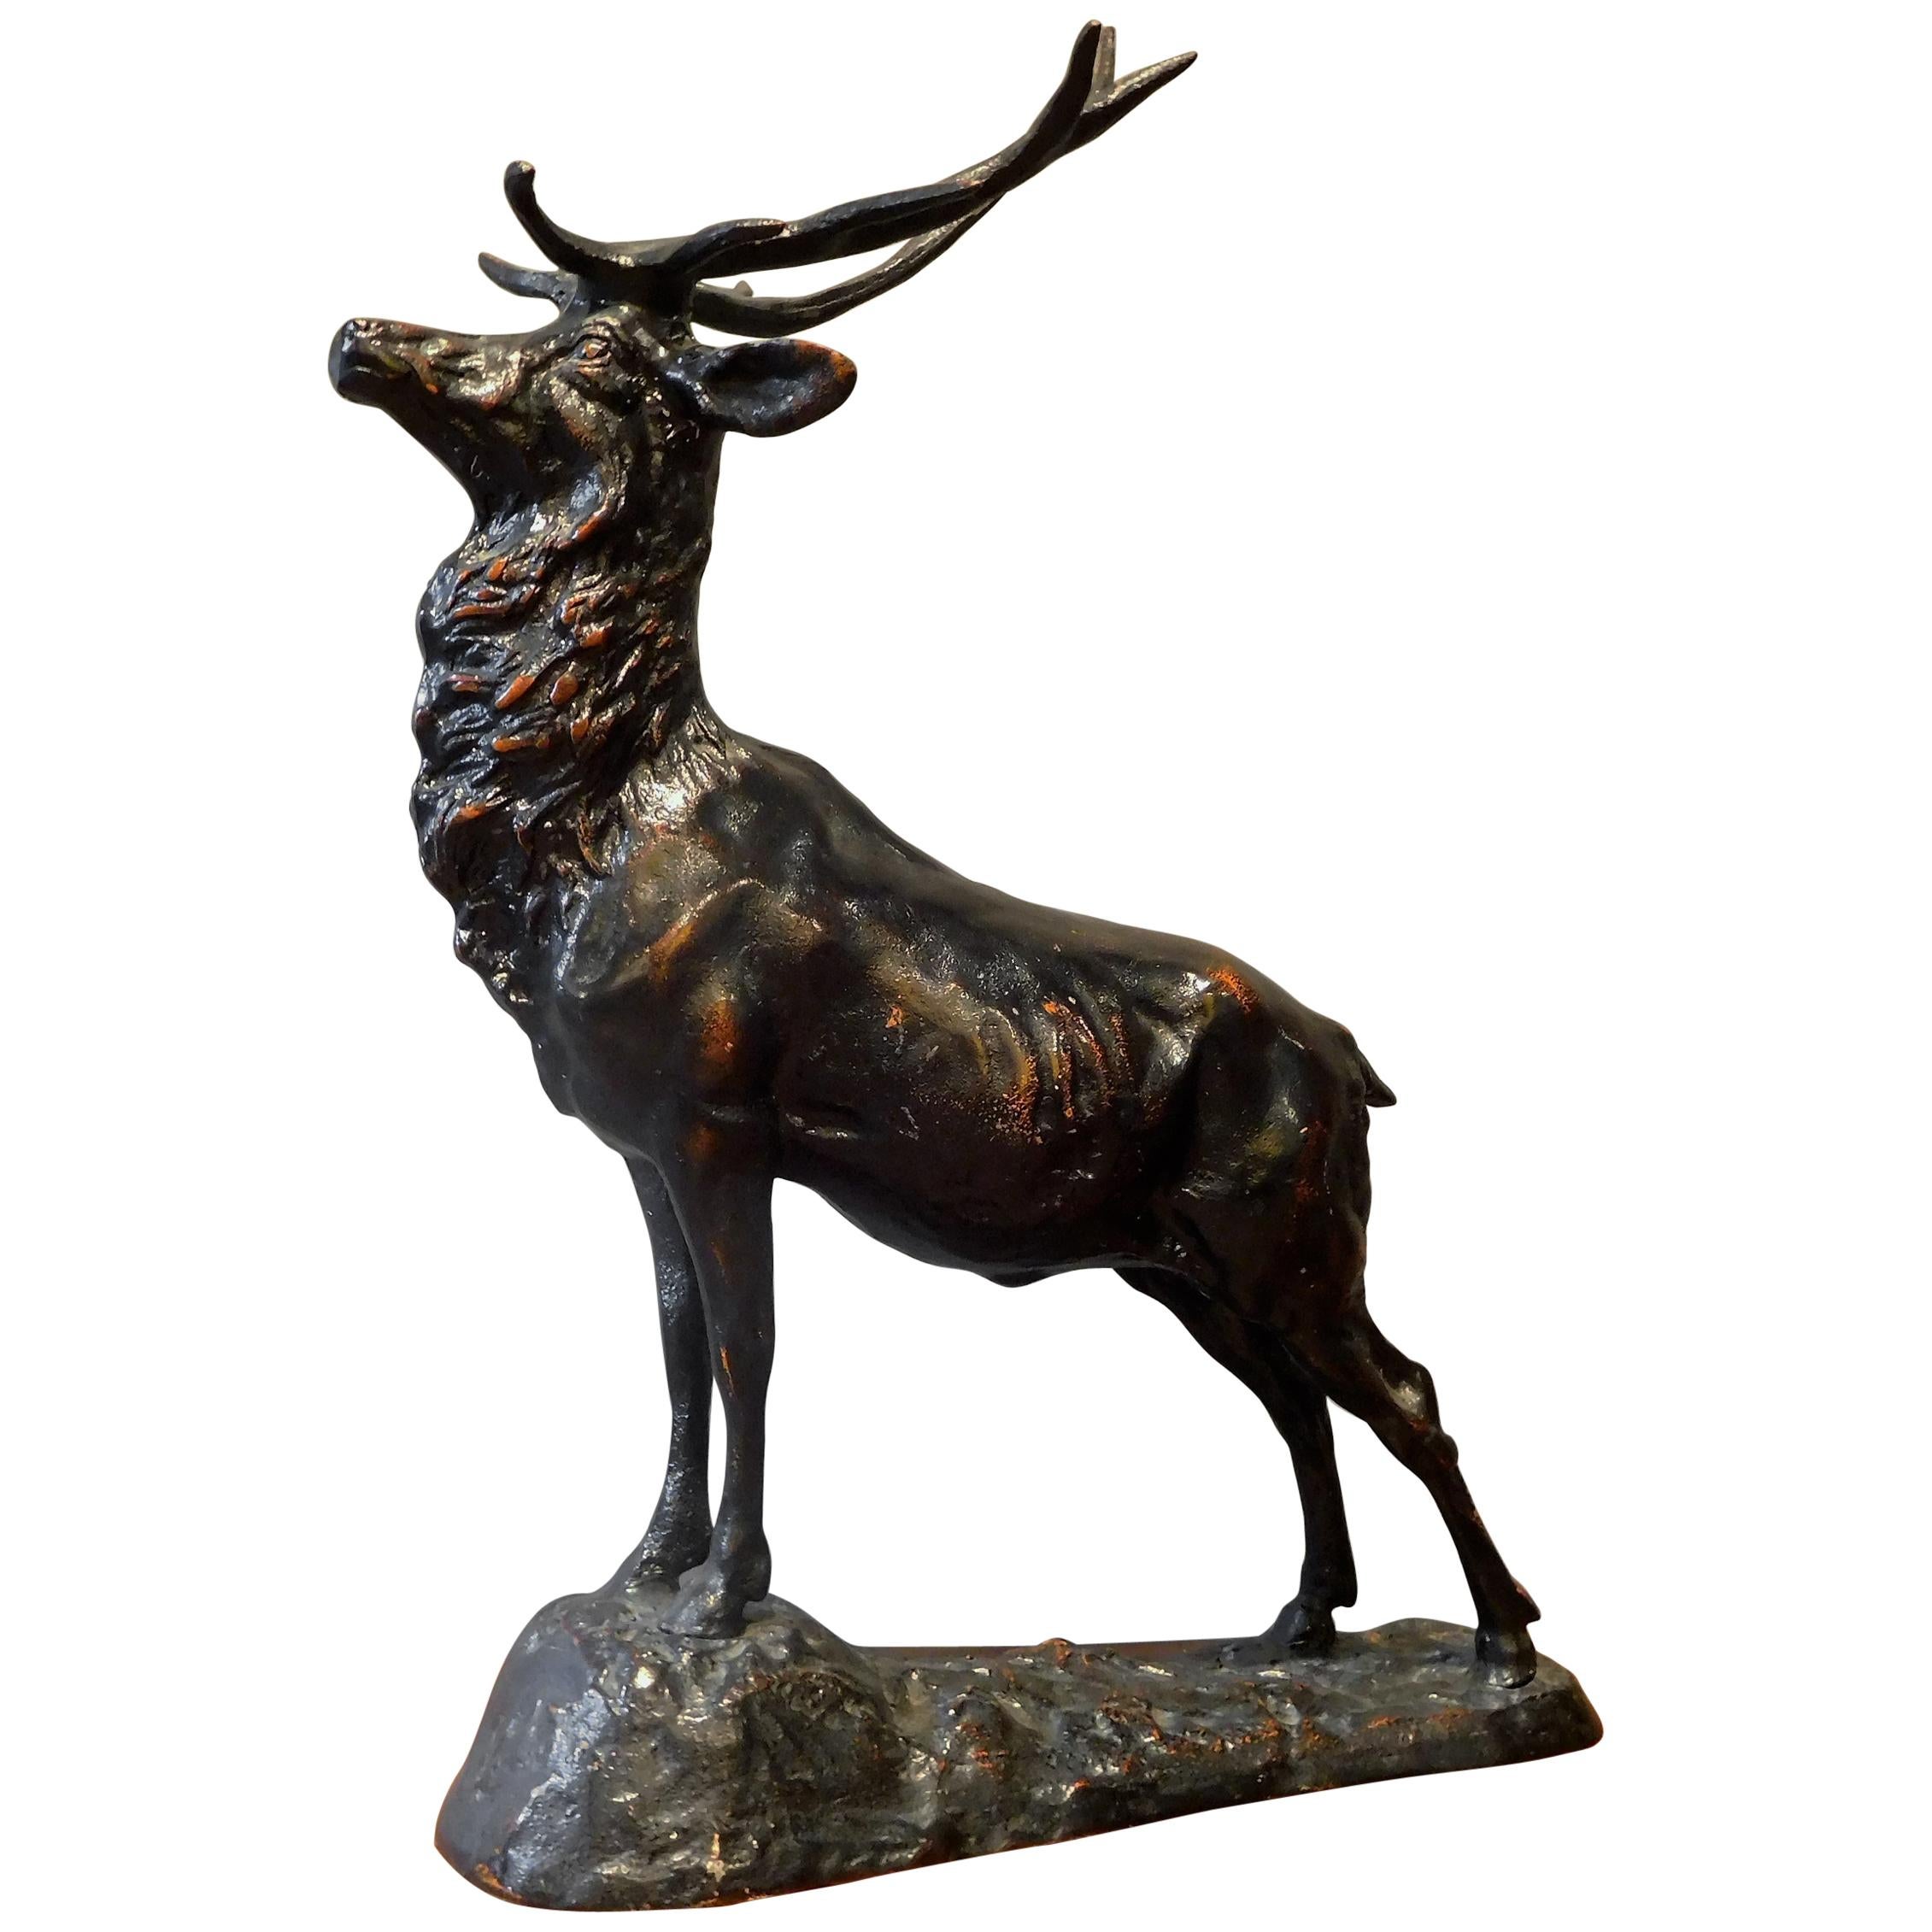 Elk Adirondack Lodge Table-Top Sculpture in Heavy Zinc Alloy, Mid-20th Century For Sale